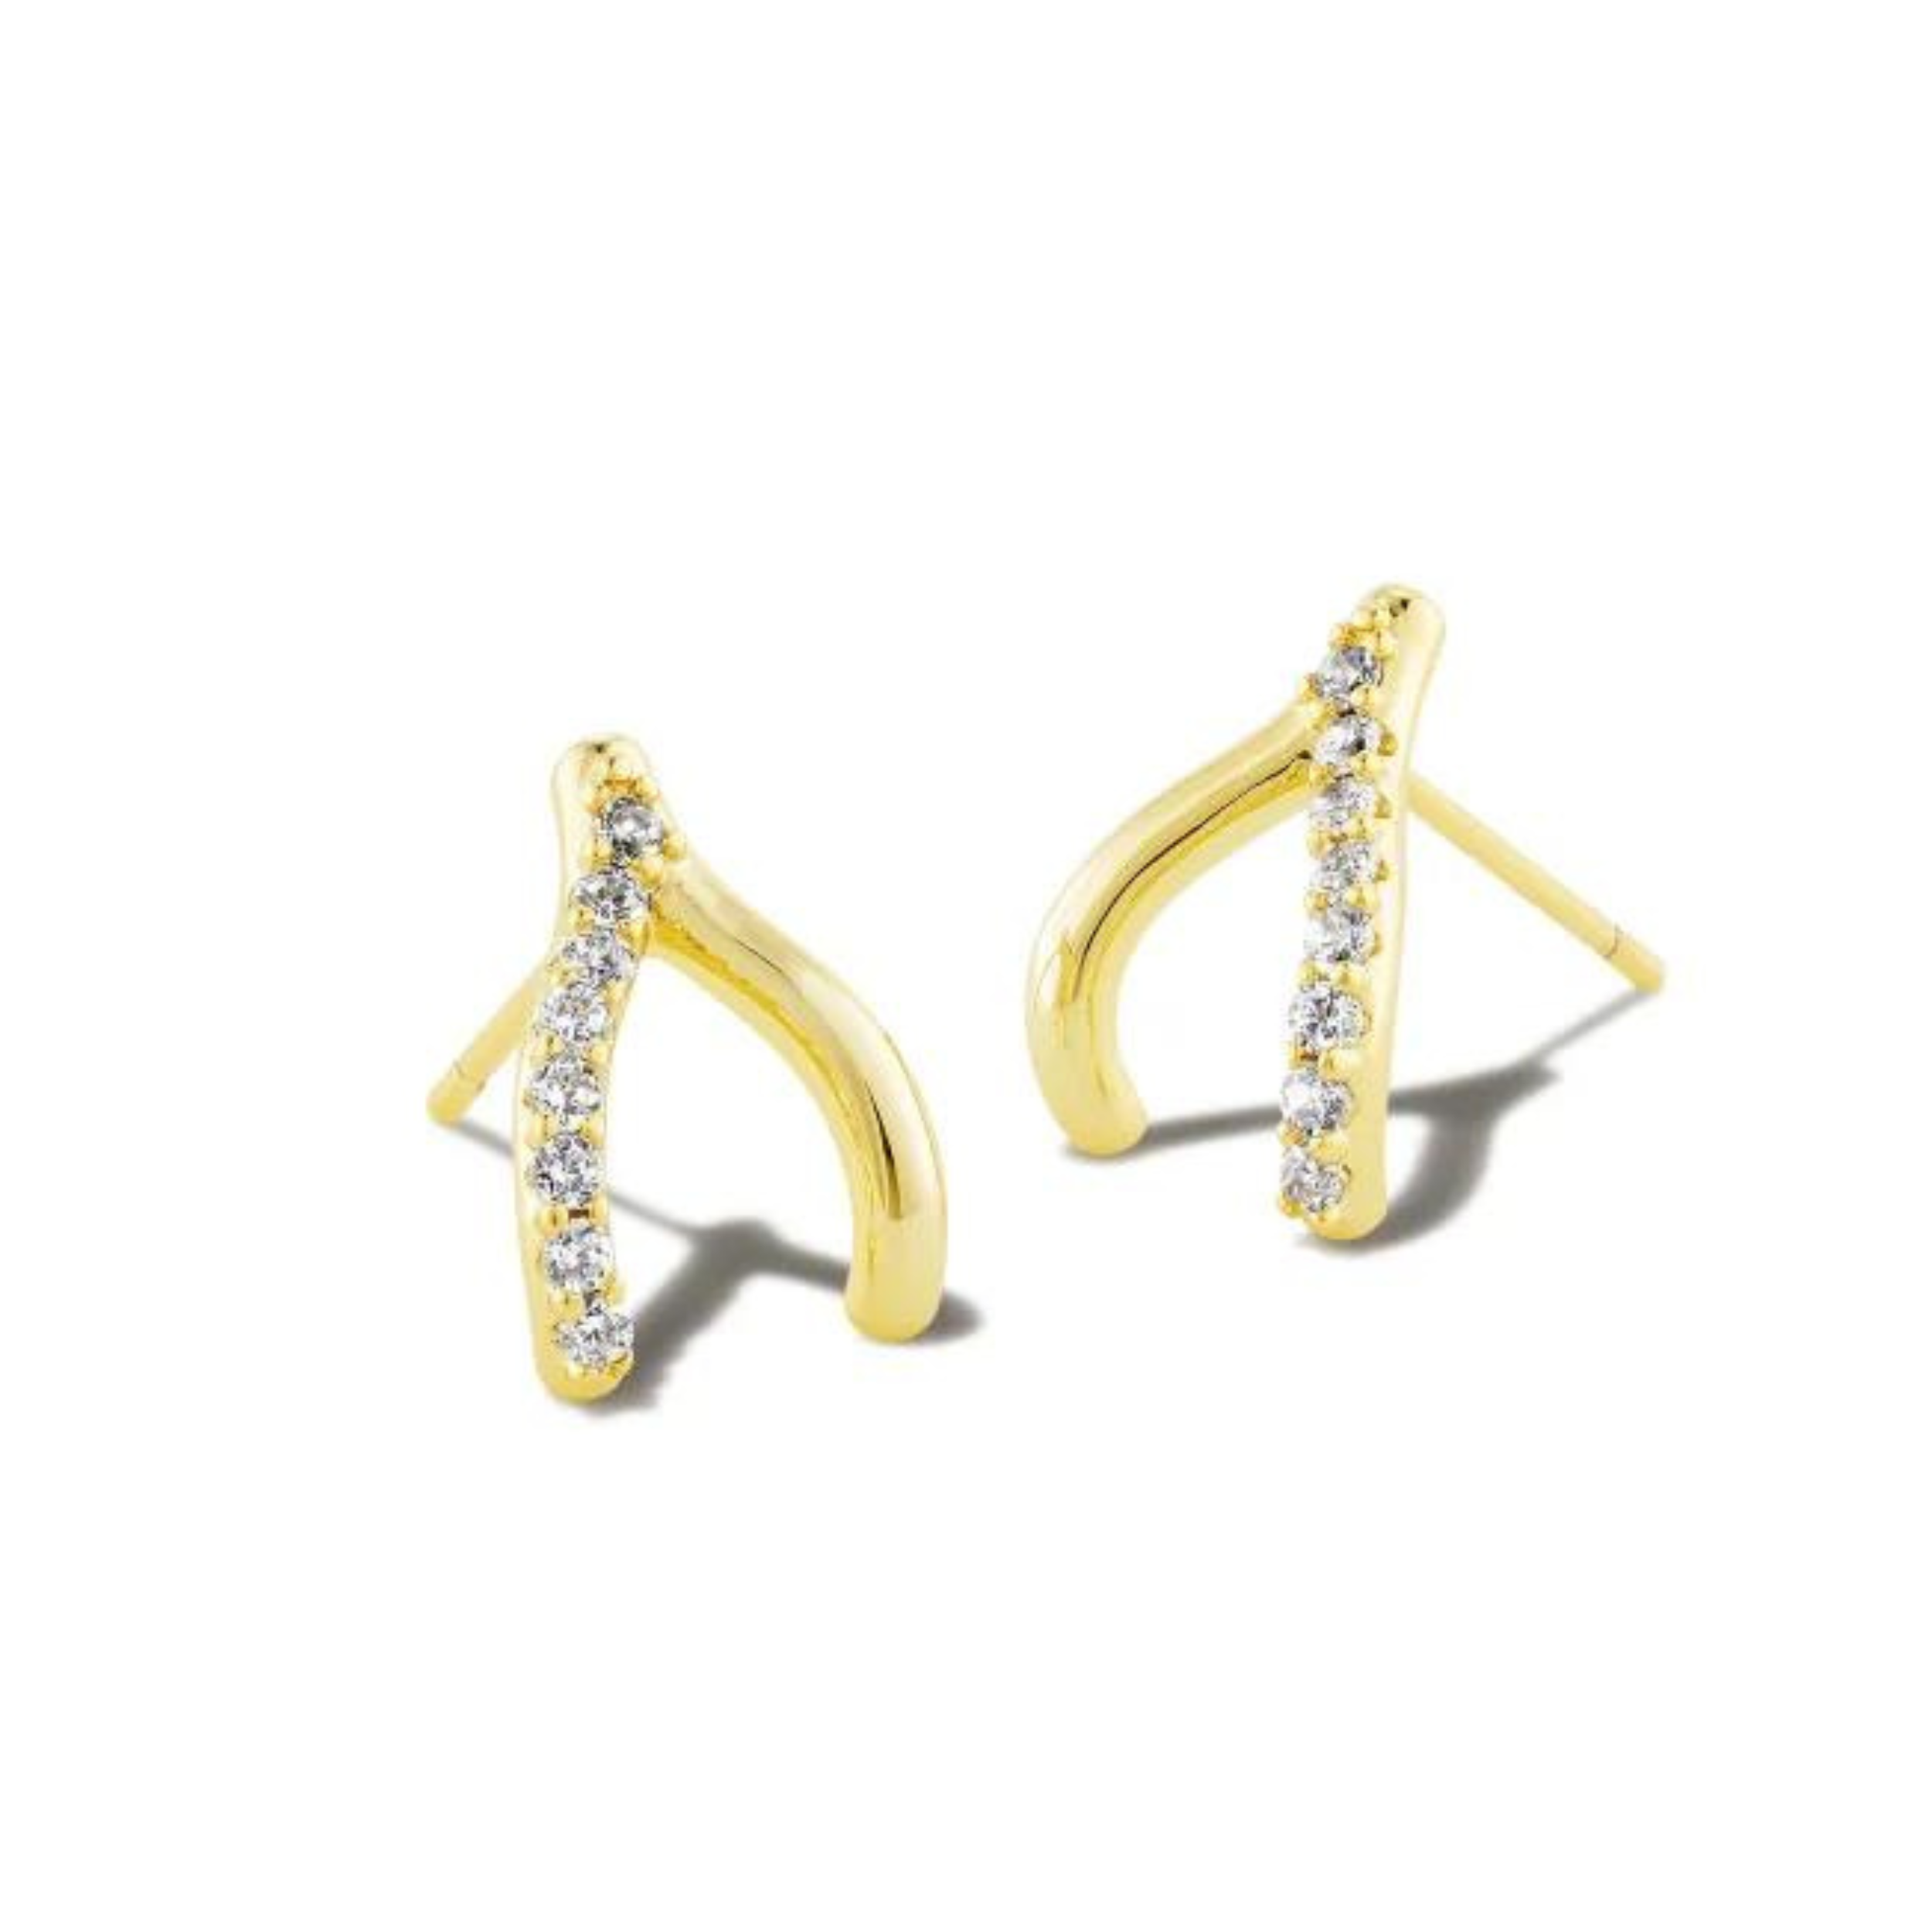 Gold wishbone earrings with white crystals pictured on a white background.